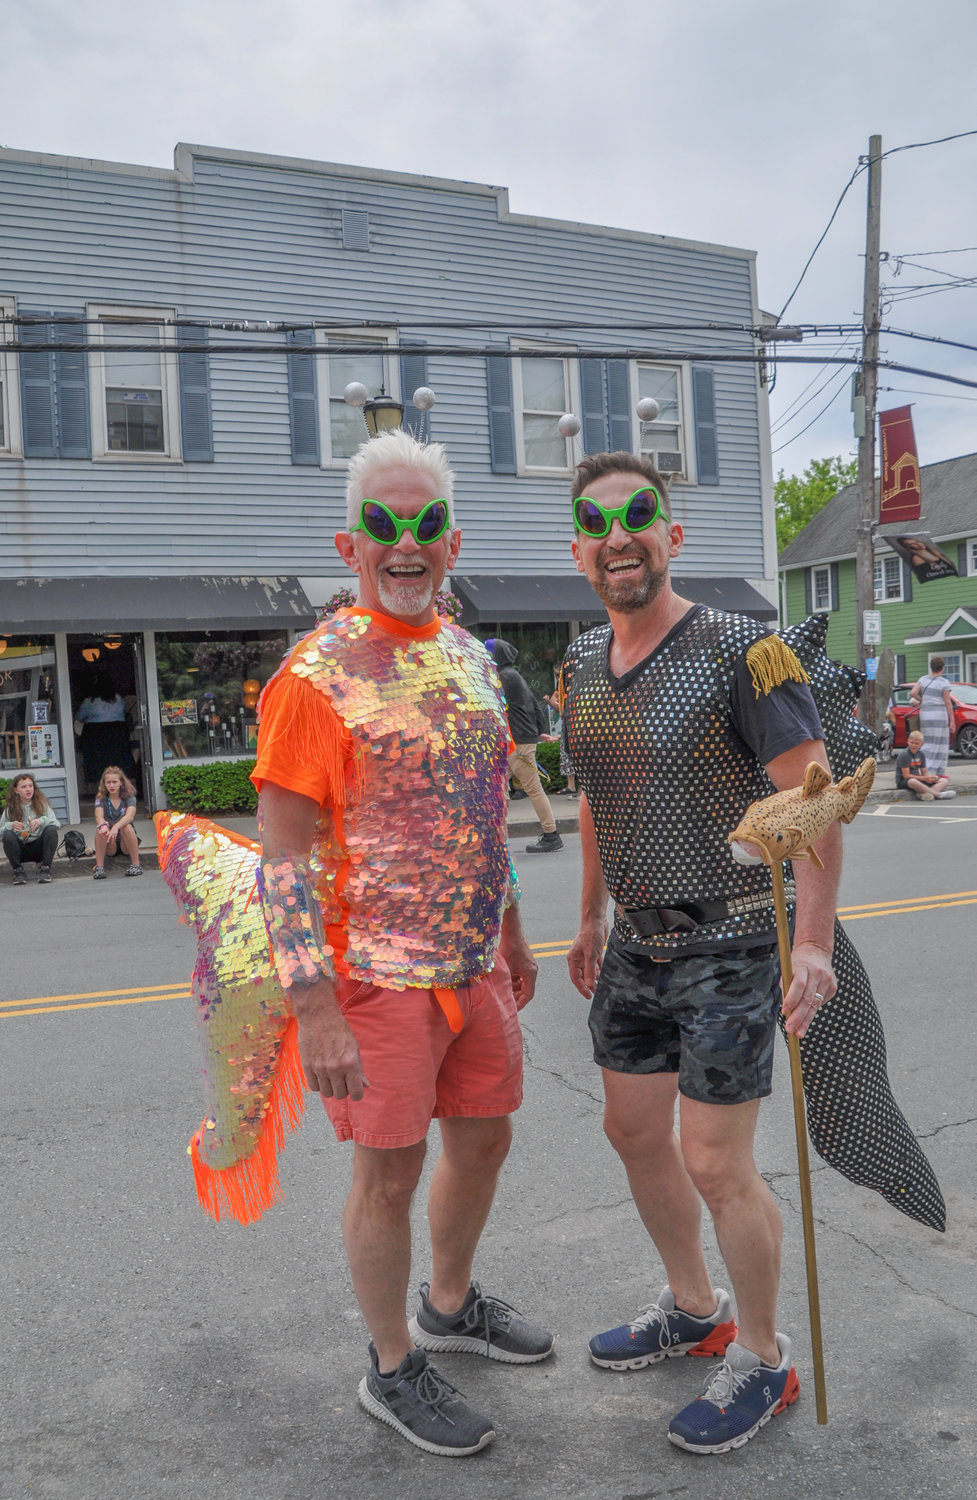 Trout Parade ambassadors Steven and Gerard are fixtures along Main Street each year, welcoming locals and visitors prior to the floats swimming their way through town in Livingston Manor, NY.